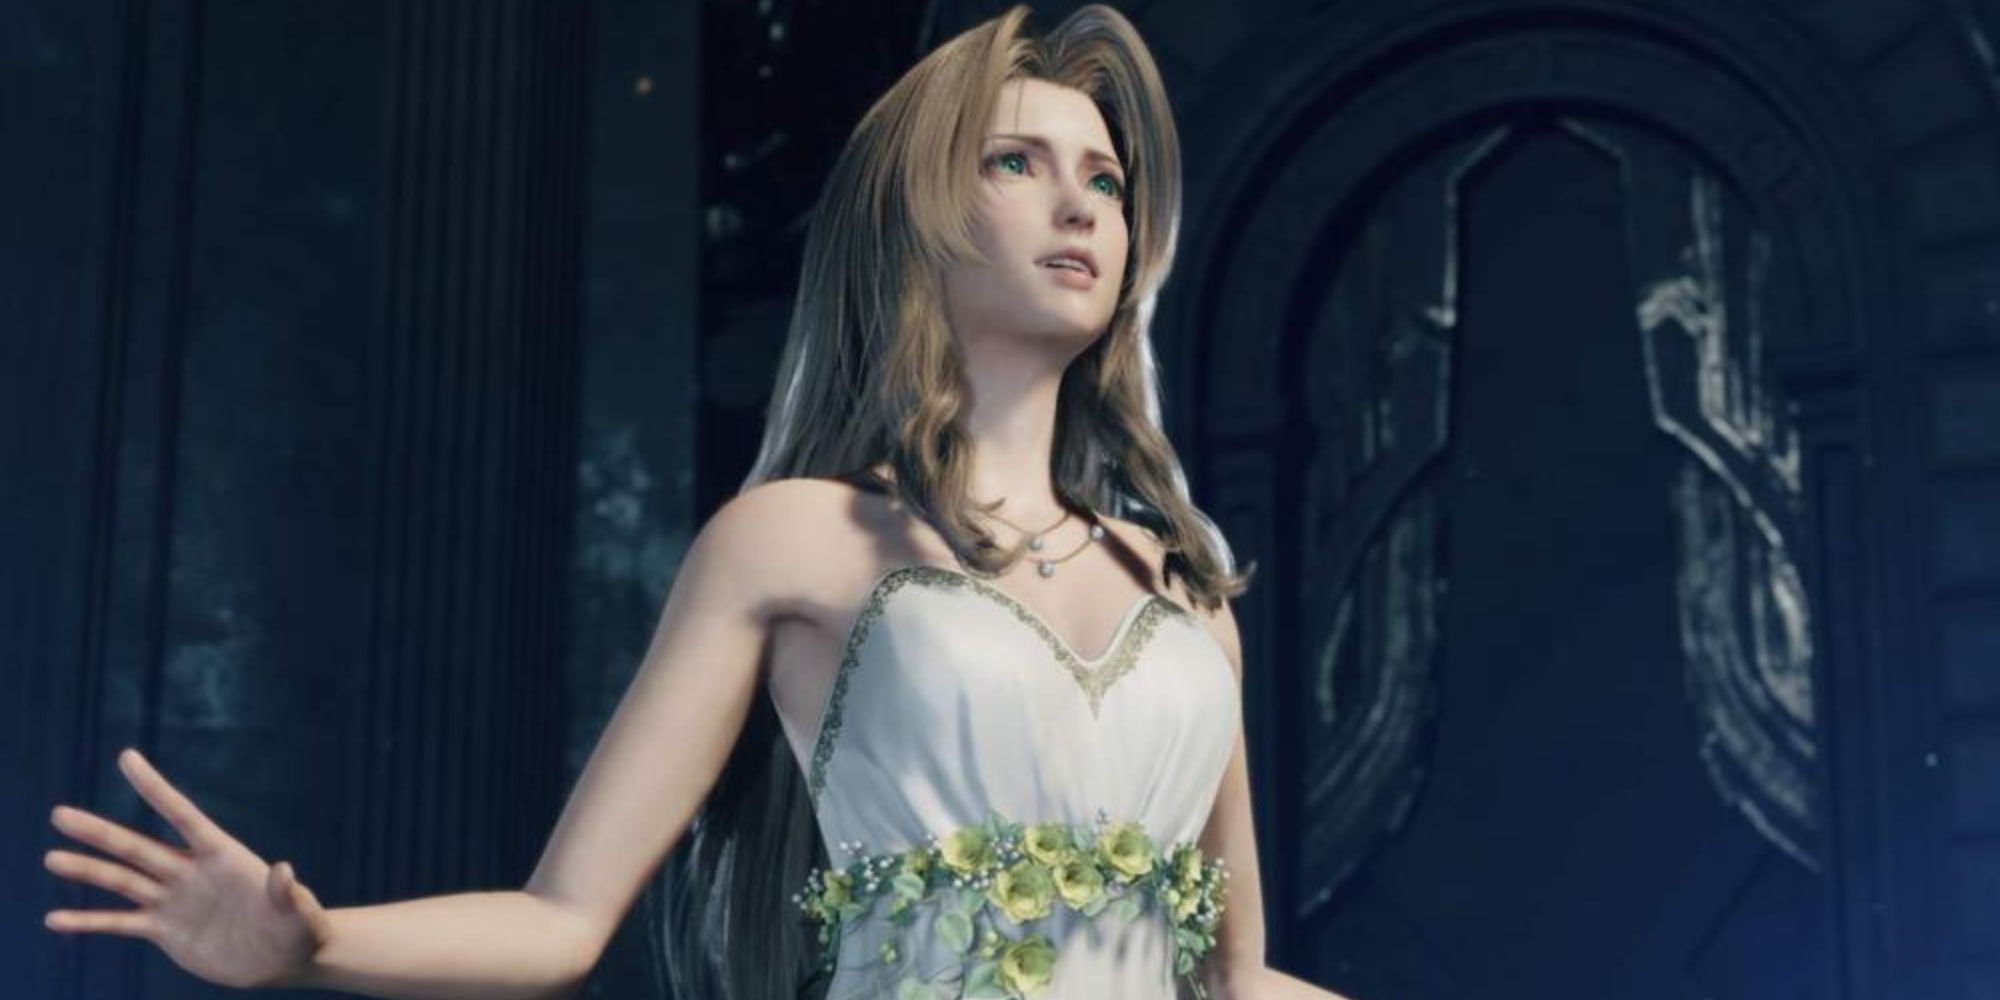 Screenshot from Final Fantasy 7 Rebirth of Aerith in white dress singing as part of the Loveless play.